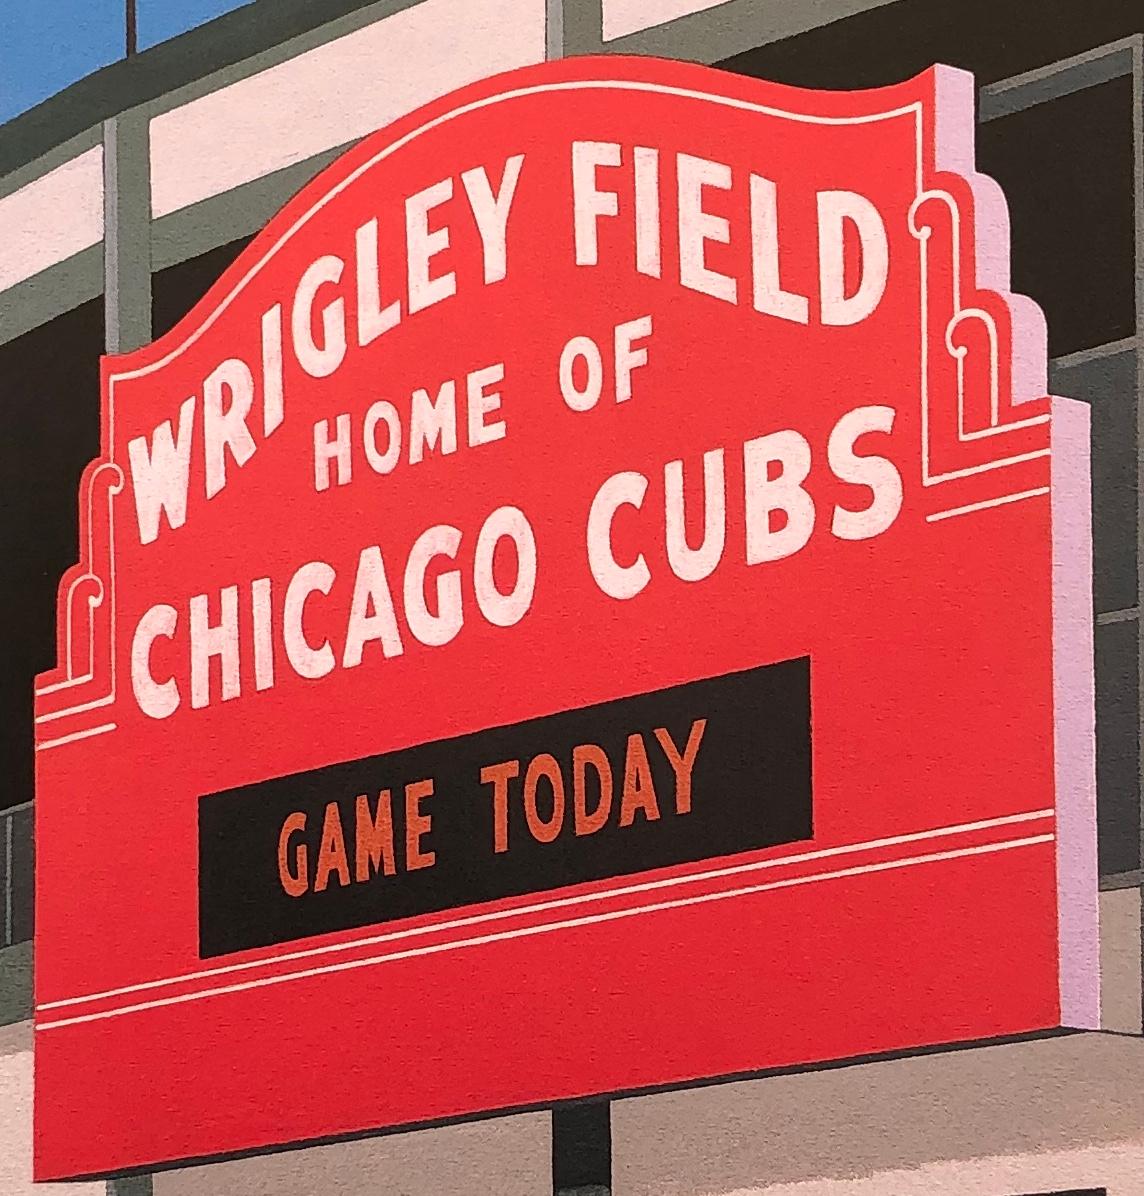 Wrigley Field. Original painting by Lynn Curlee
Acrylic on stretched canvas. Gallery wrapped with painted edges
This painting was used as an illustration in 
BALLPARK — THE STORY OF AMERICA’S BASEBALL FIELDS
Atheneum Books for Young Readers,